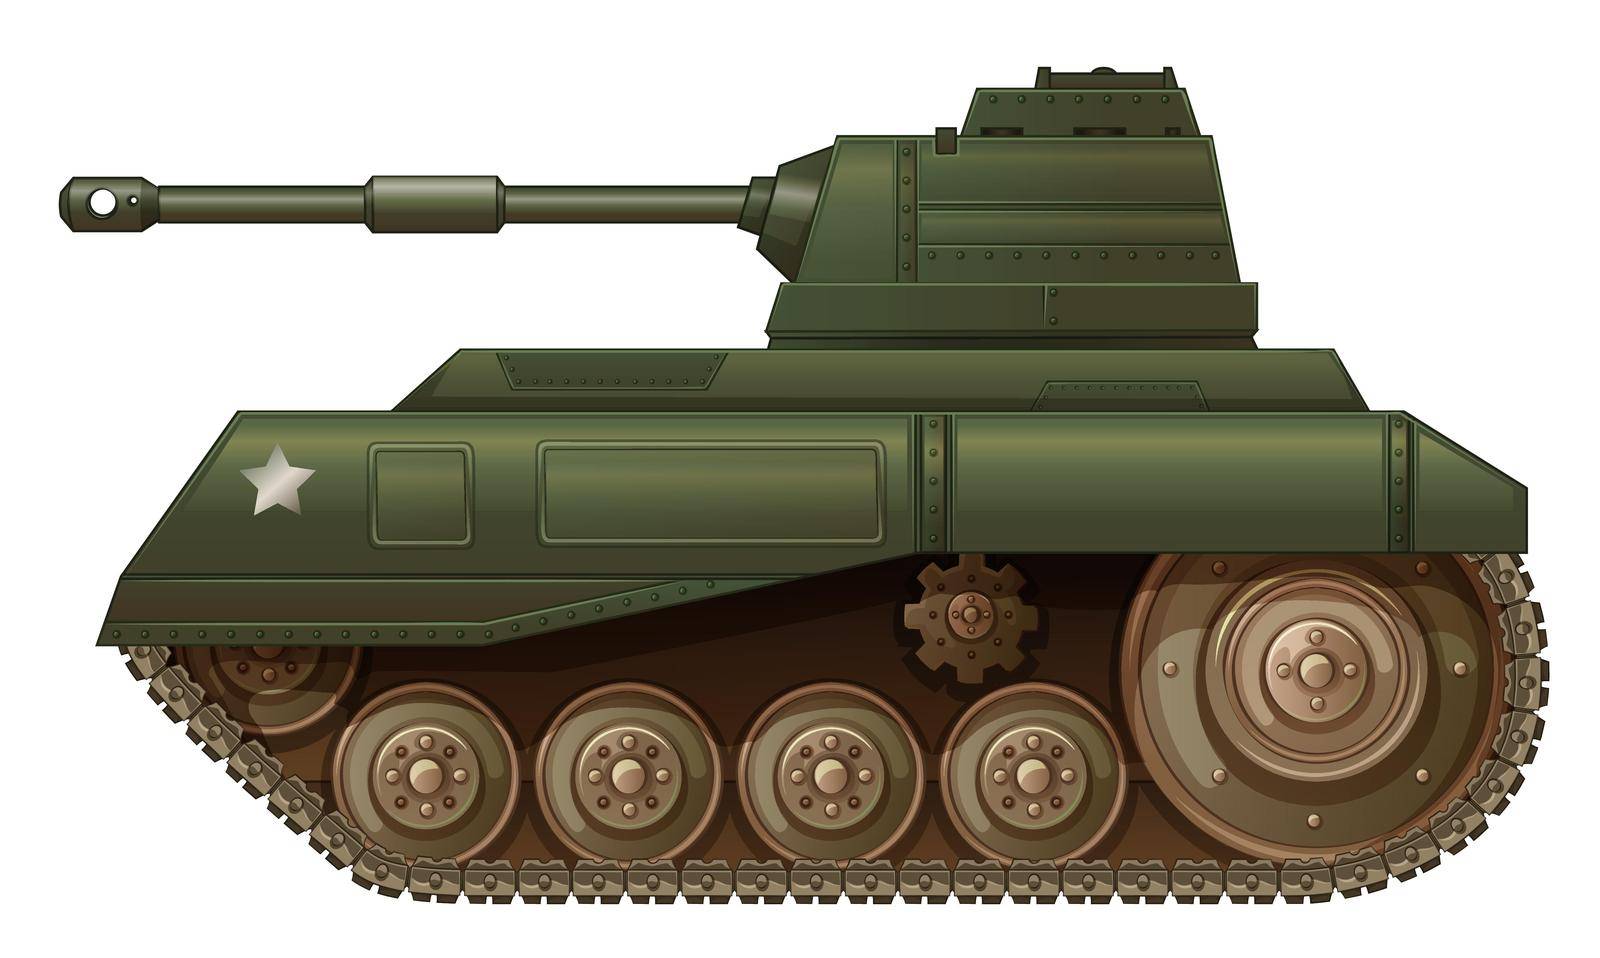 Illustration of a green military tank on a white background